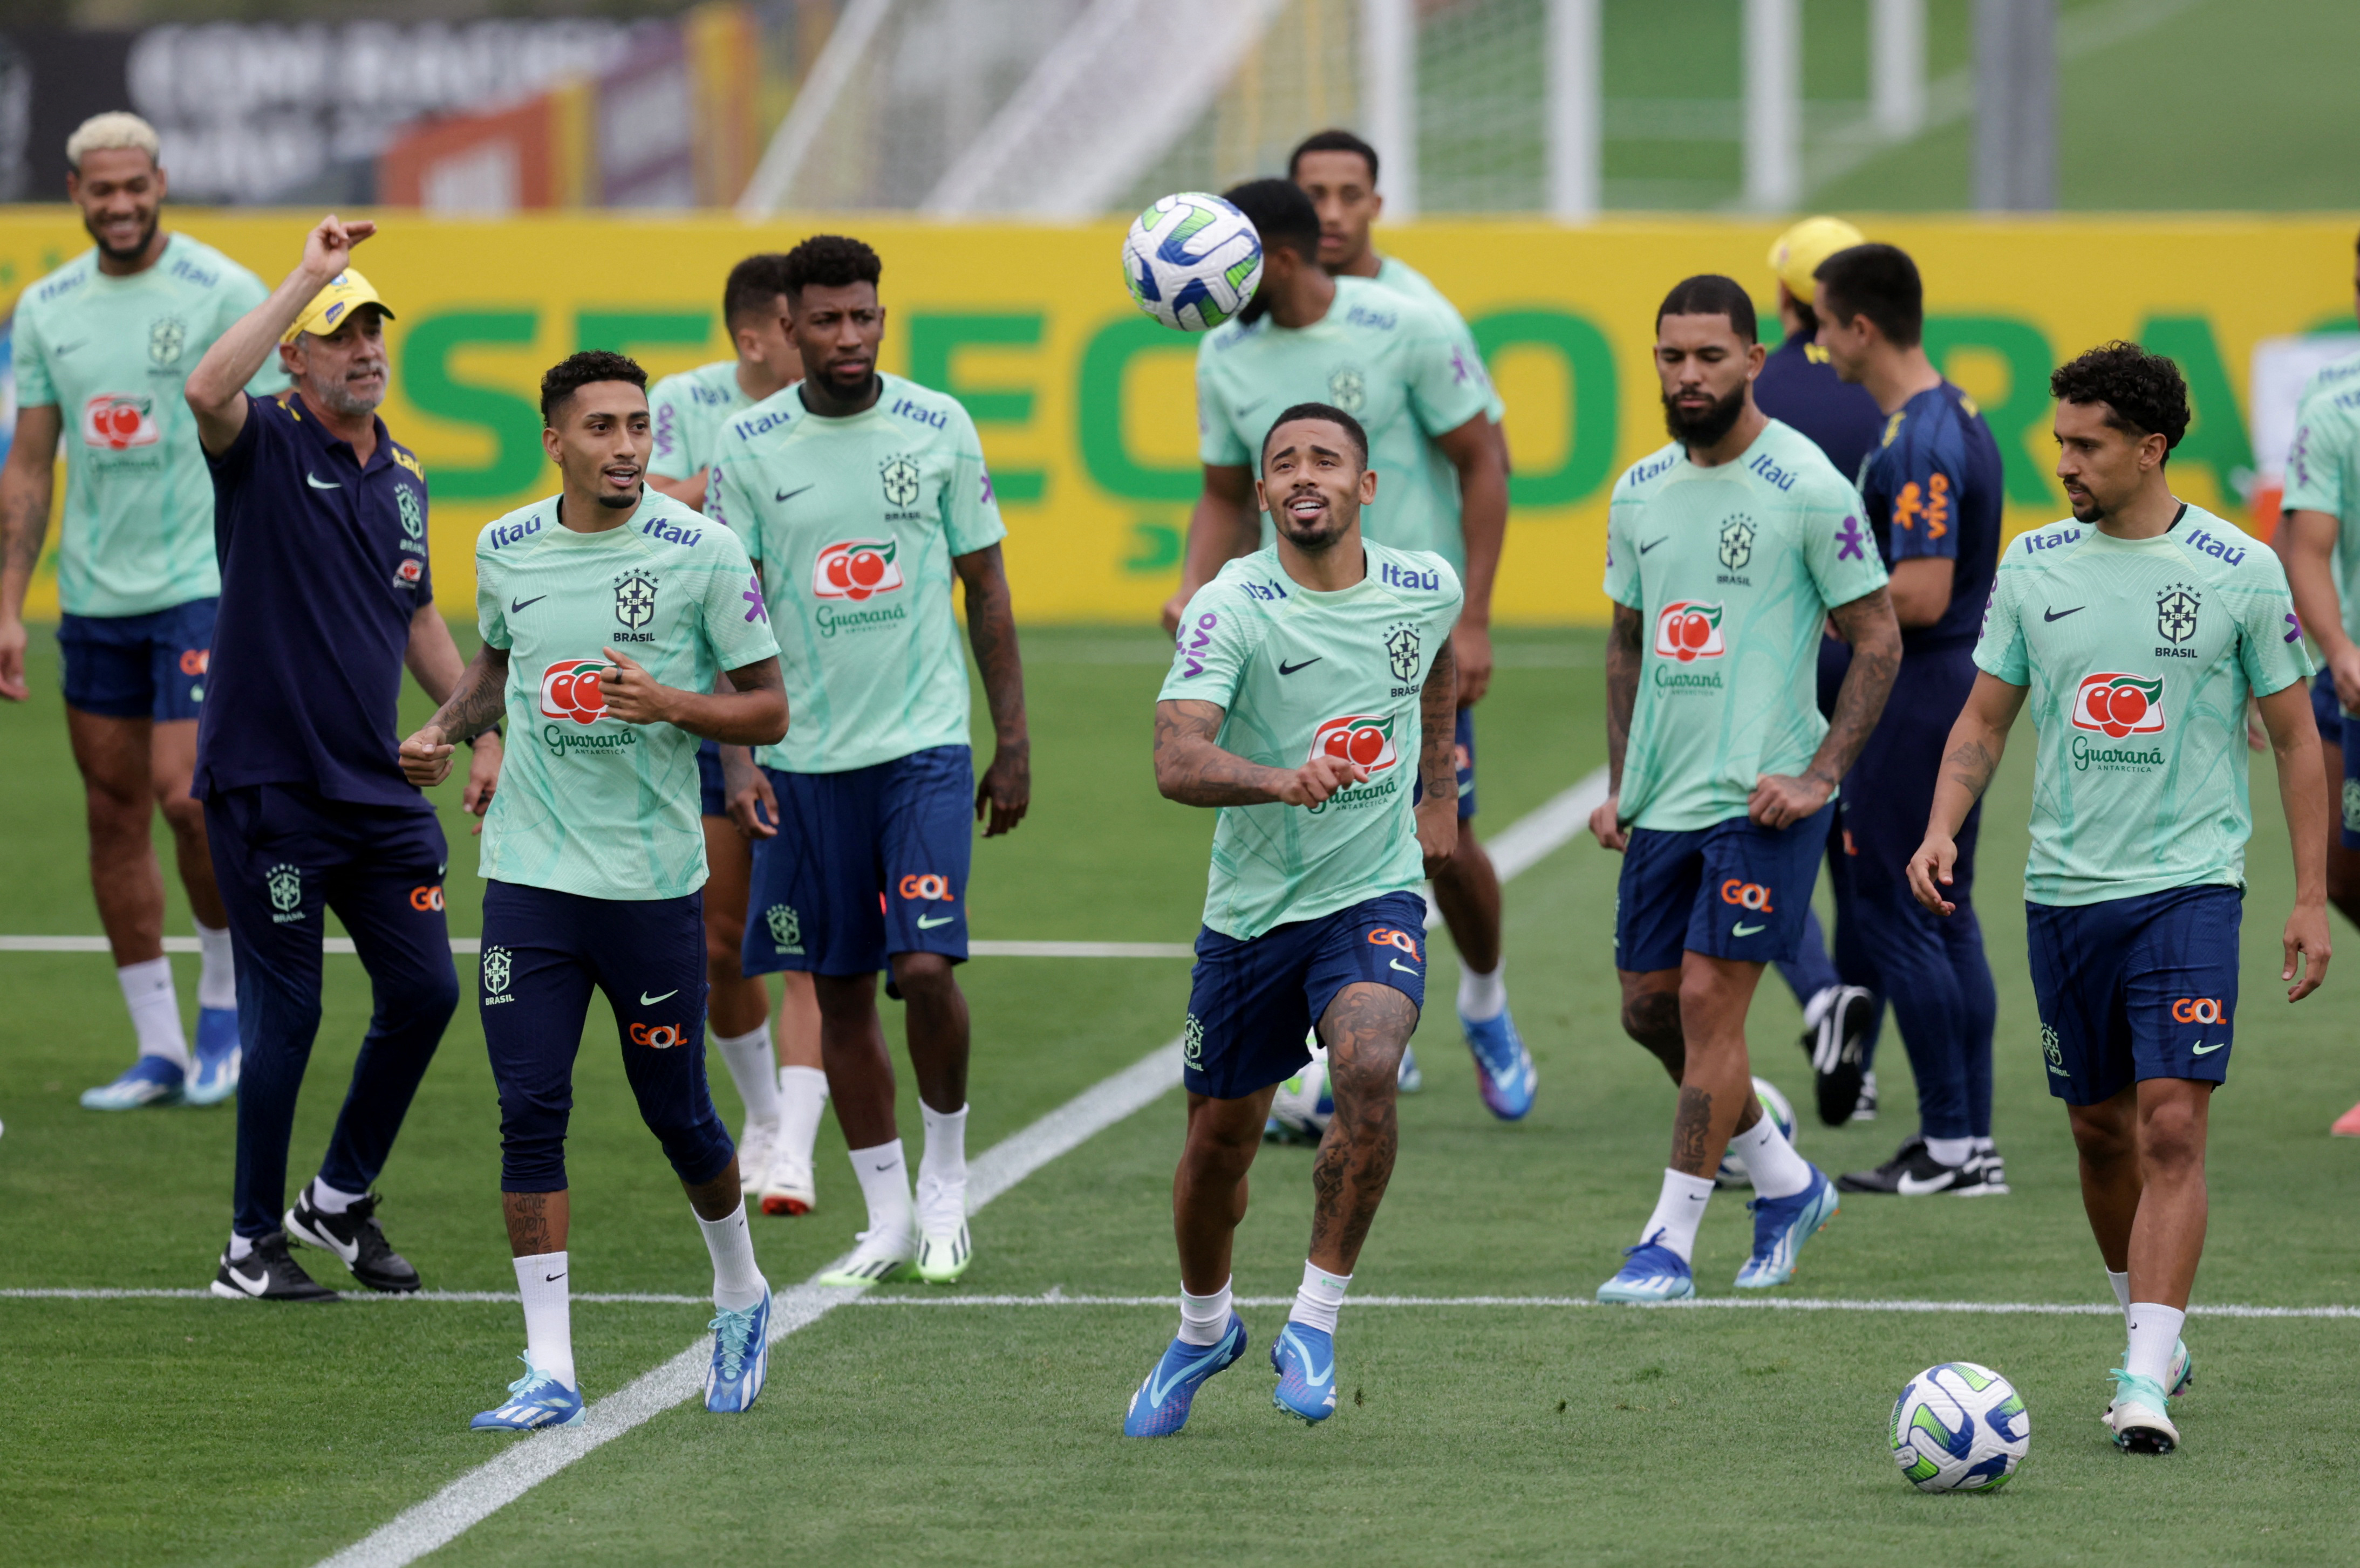 Brazil will stay true to their identity against Messi's Argentina